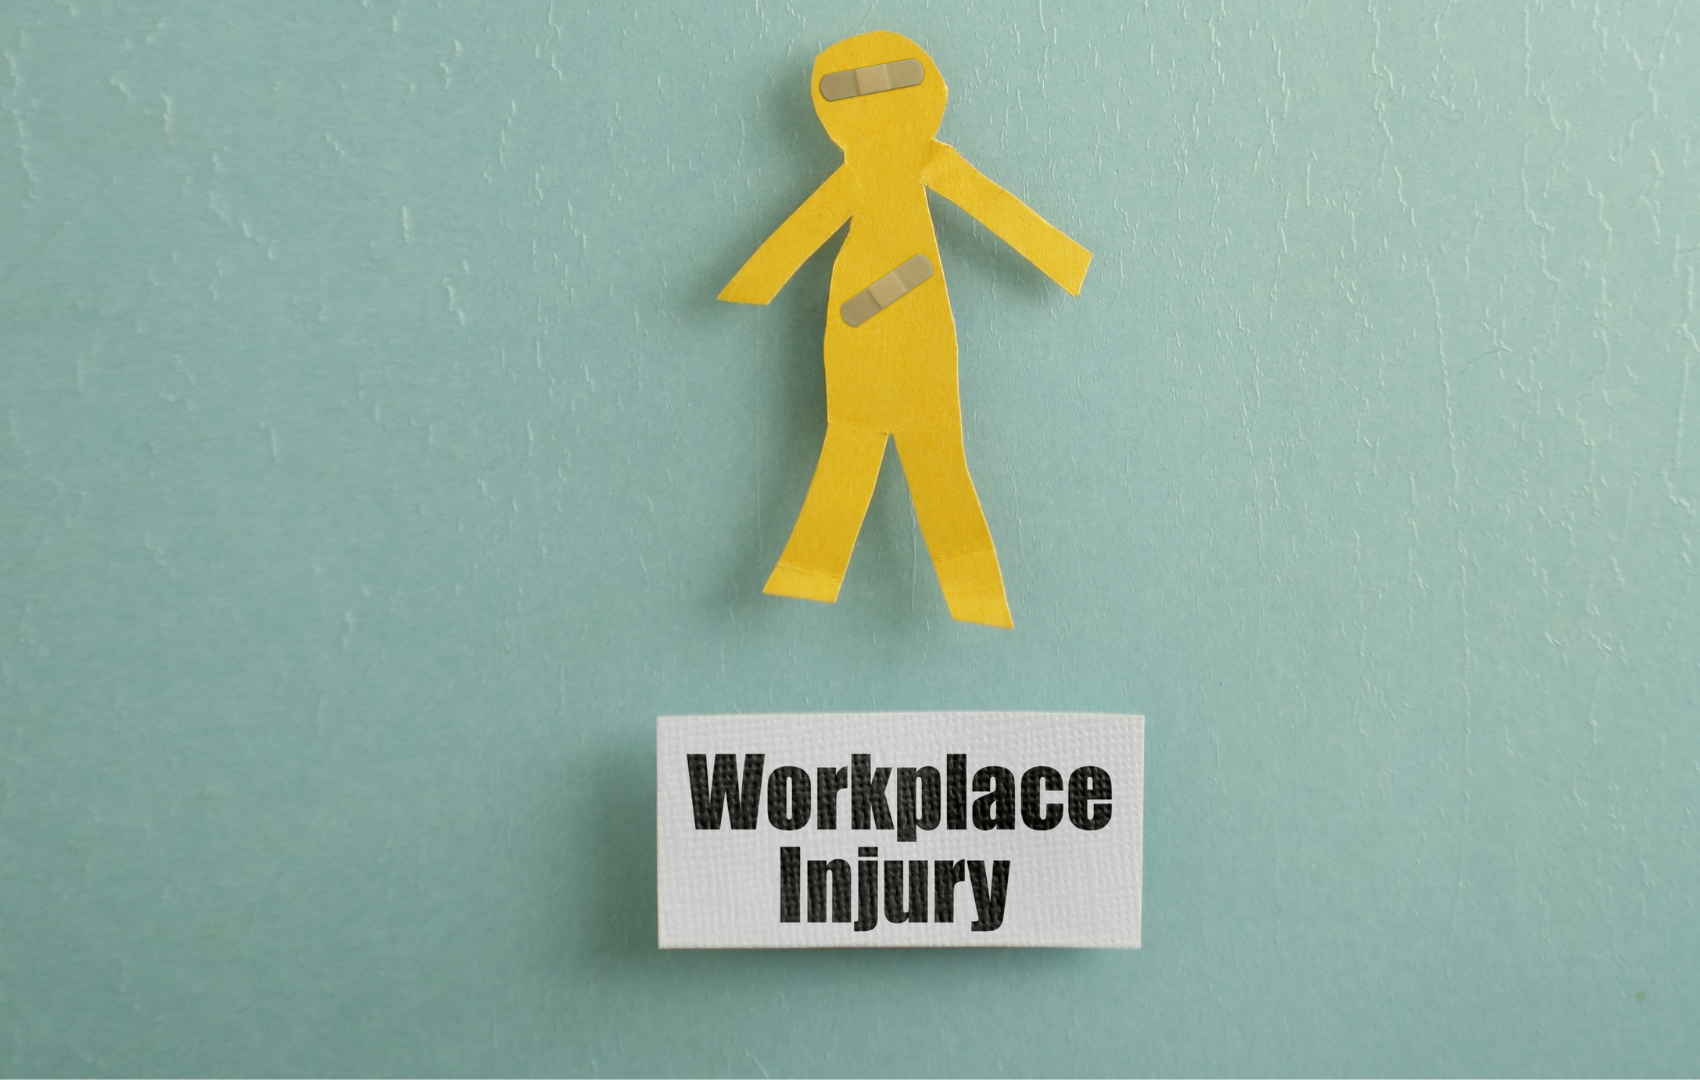 Bonked! Compensation for workplace injury by falling banana reduced for contributory negligence